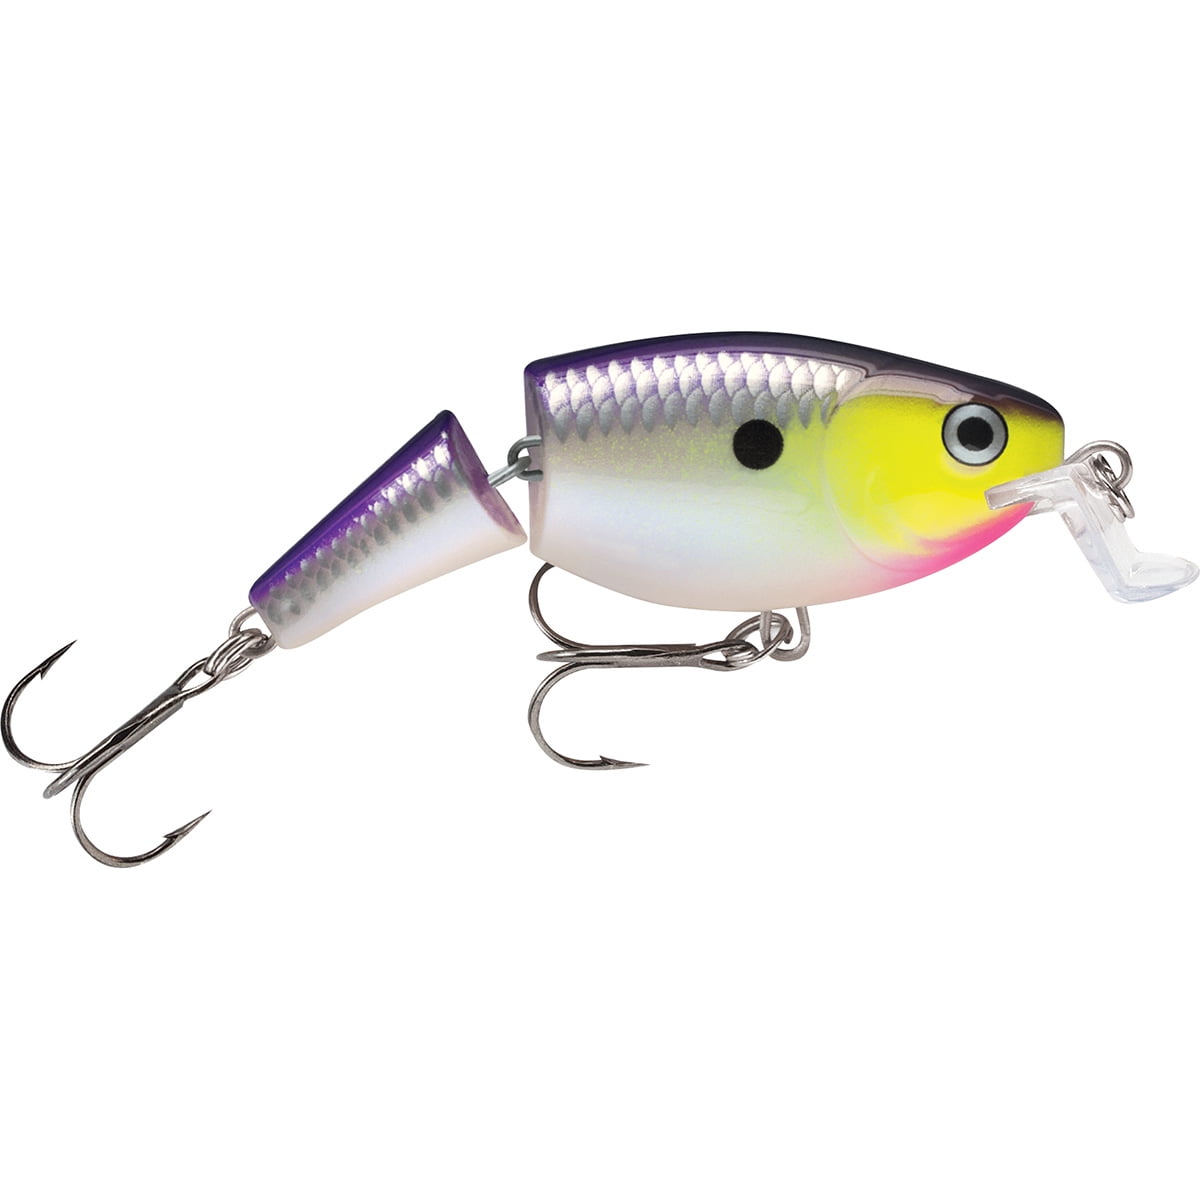 Rapala Jointed Shallow Shad Rap 07 Fishing Lure - Purpledescent